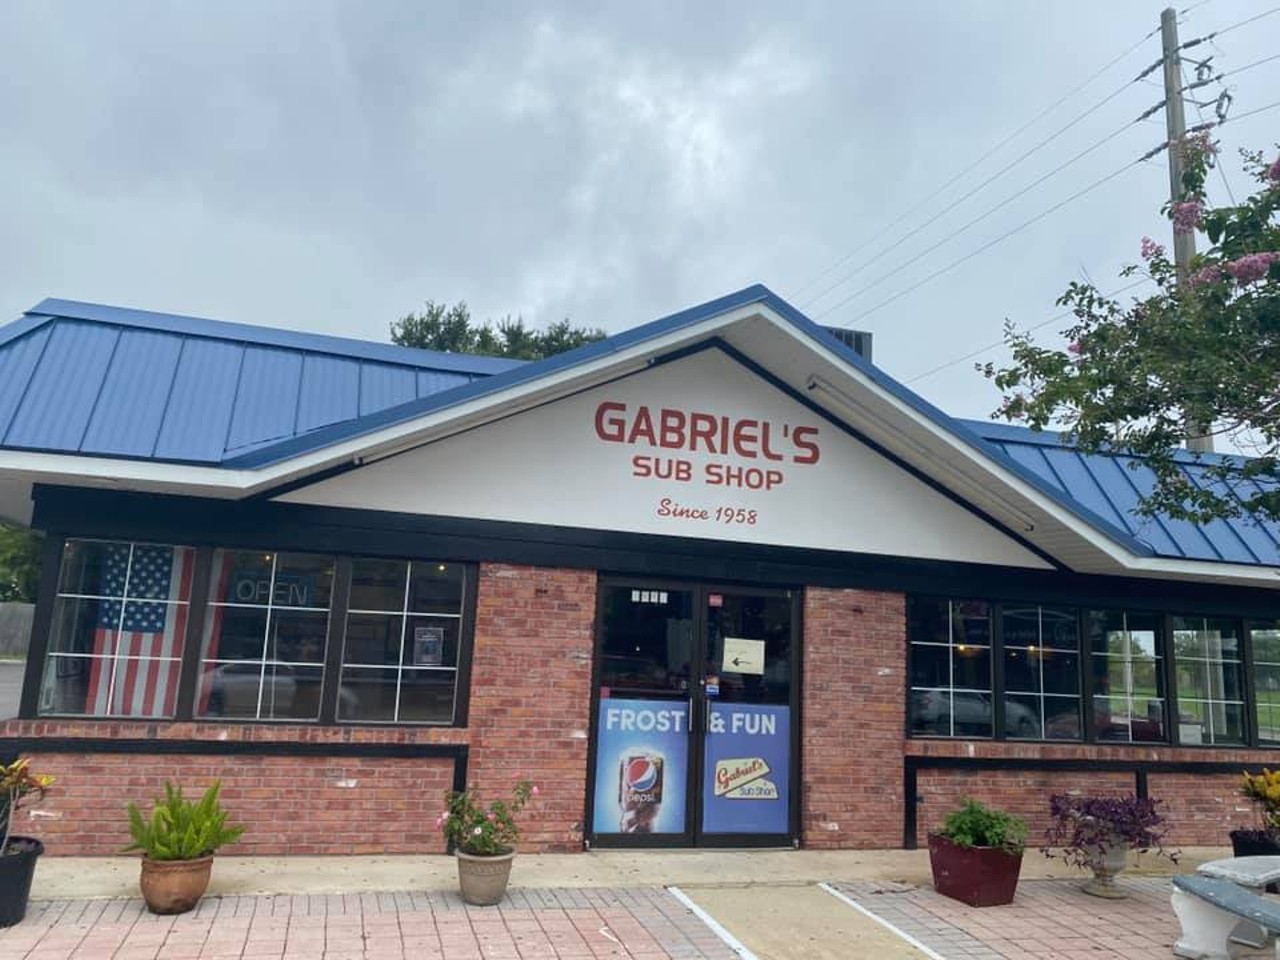 Gabriel&#146;s Submarine Sandwich 
3006 Edgewater Drive, Orlando, FL 32804, (407) 425-9926
These iconic sandwiches have been at College Park since 1958. They have authentic American food like wings, subs and curly fries.
Photo via Gabriel&#146;s Submarine Sandwich/Facebook
Gabriel&#146;s Submarine Sandwich 
3006 Edgewater Drive, Orlando, FL 32804, (407) 425-9926
These iconic sandwiches have been at College Park since 1958. They have authentic American food like wings, subs and curly fries.
Photo via Gabriel&#146;s Submarine Sandwich/Facebook